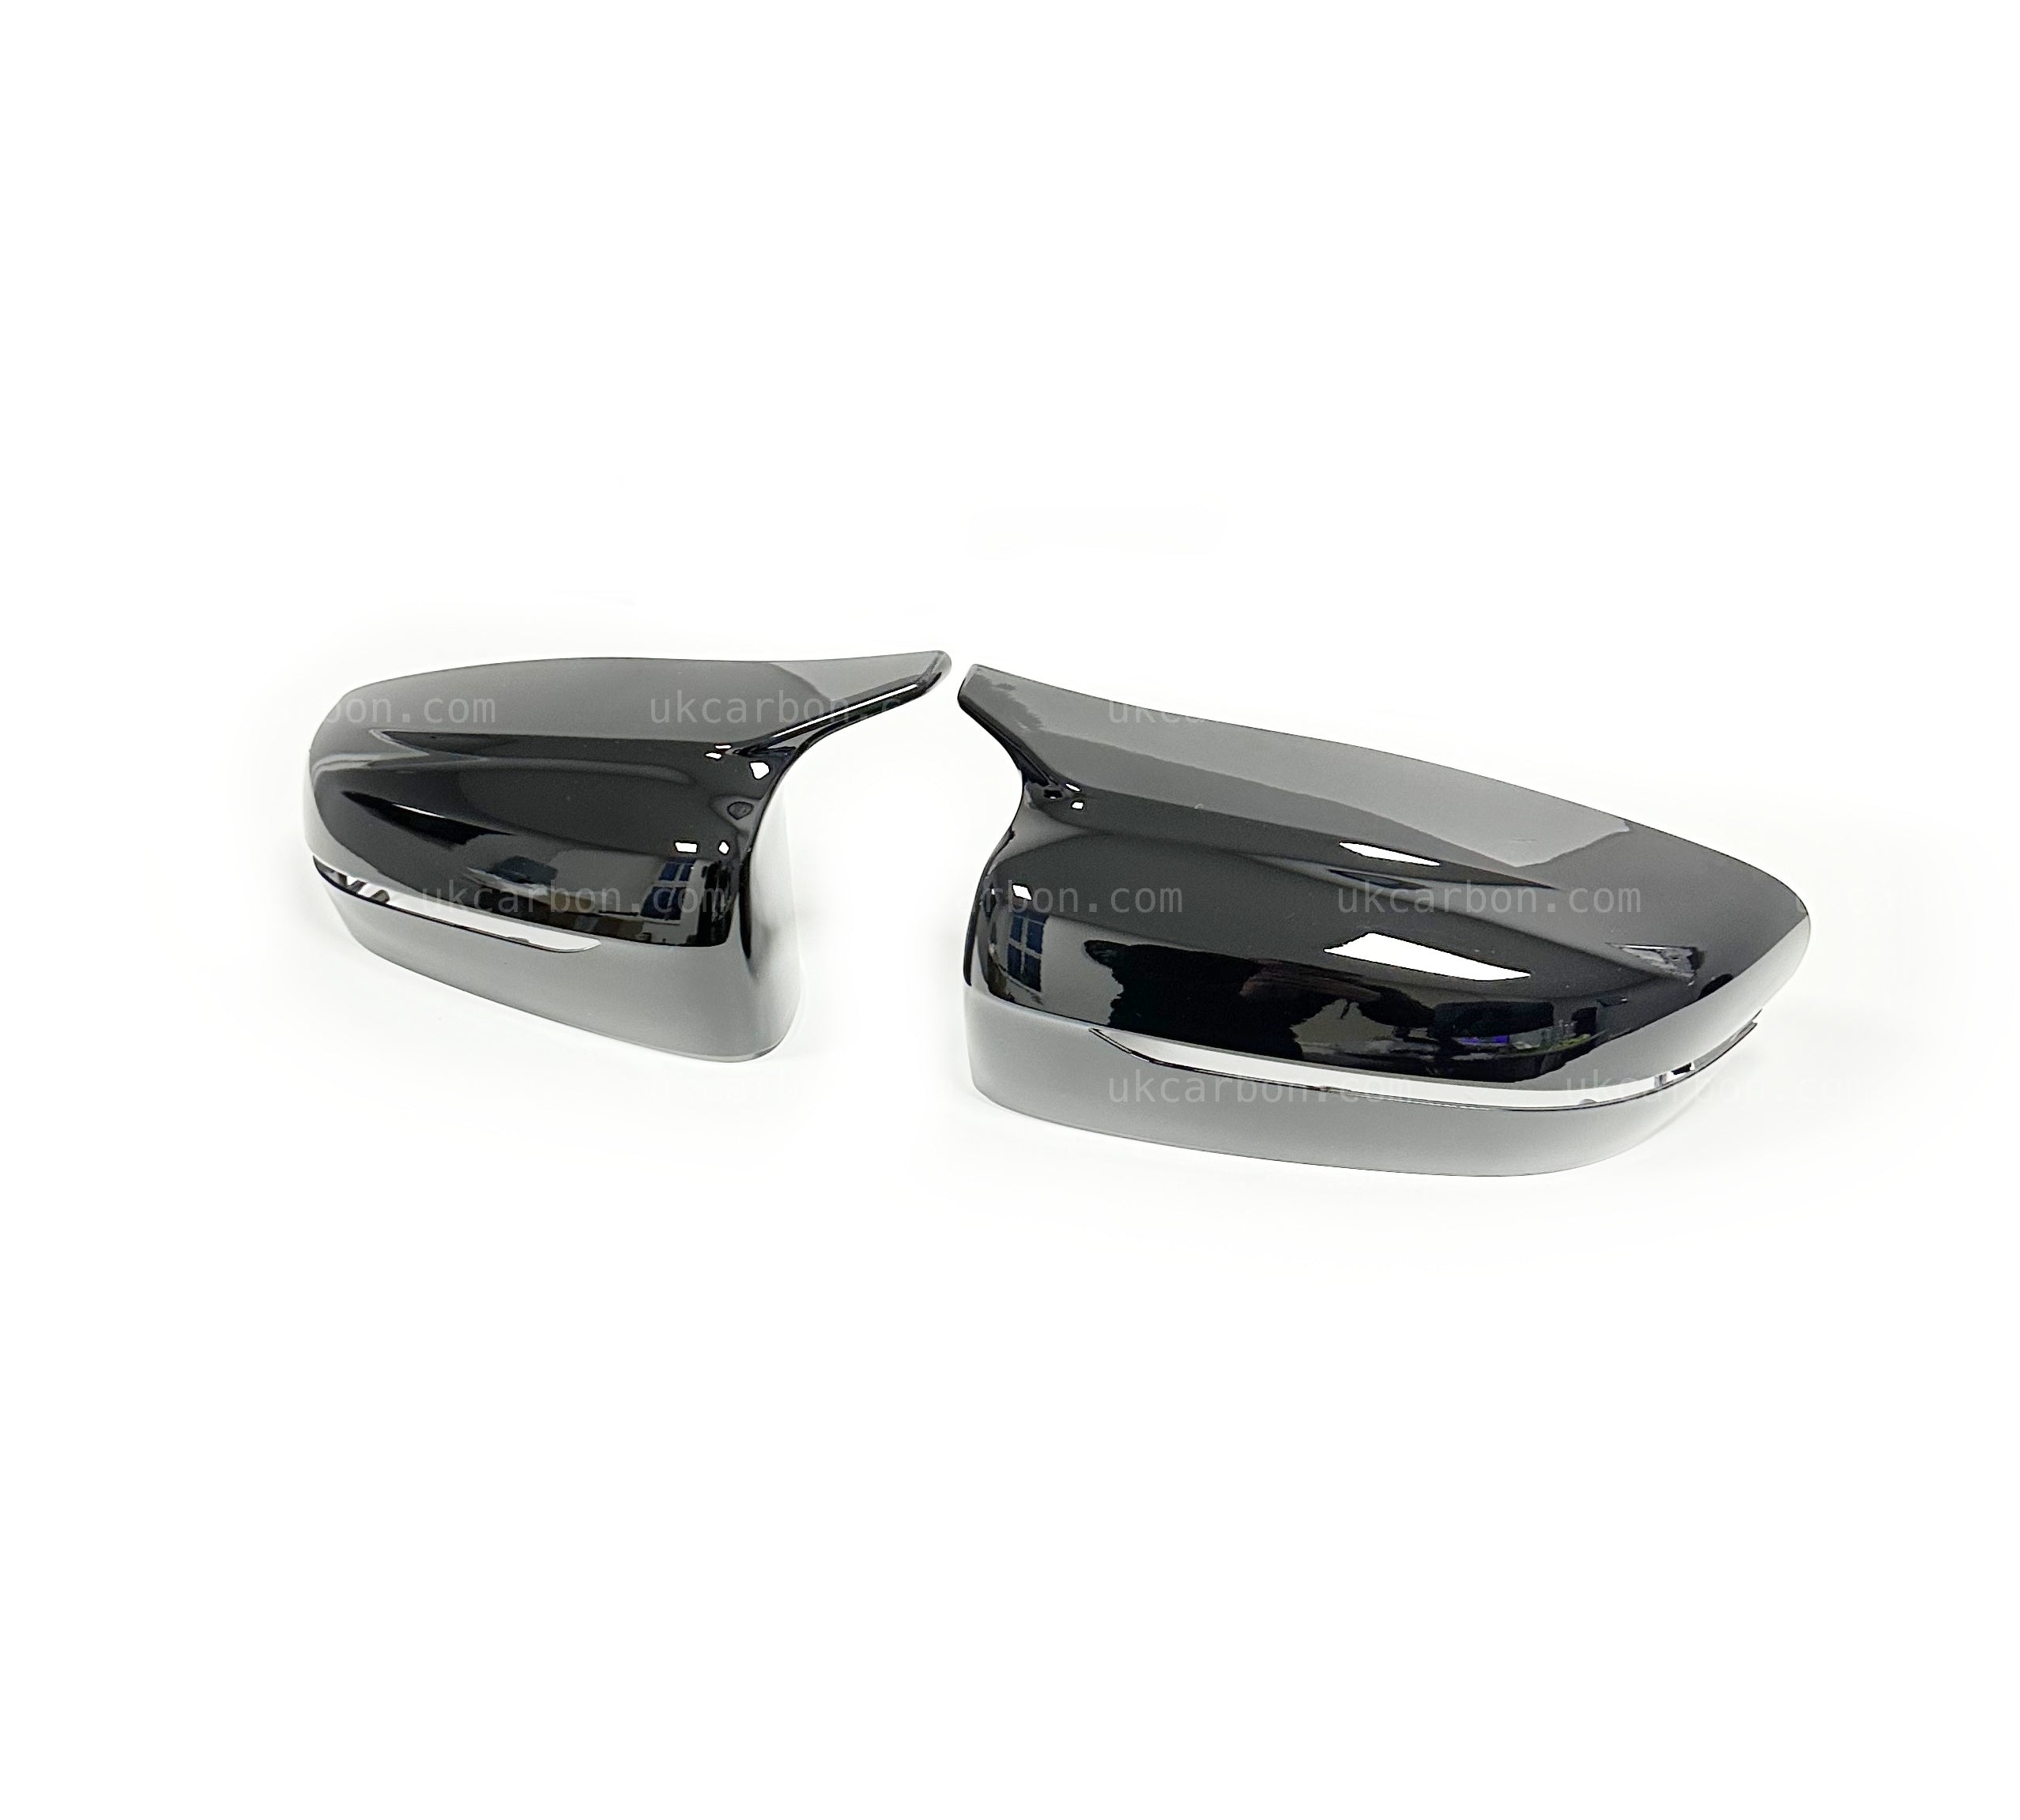 BMW 5 Series Gloss Black M Style Wing Mirror Cover Replacements G30 by UKCarbon